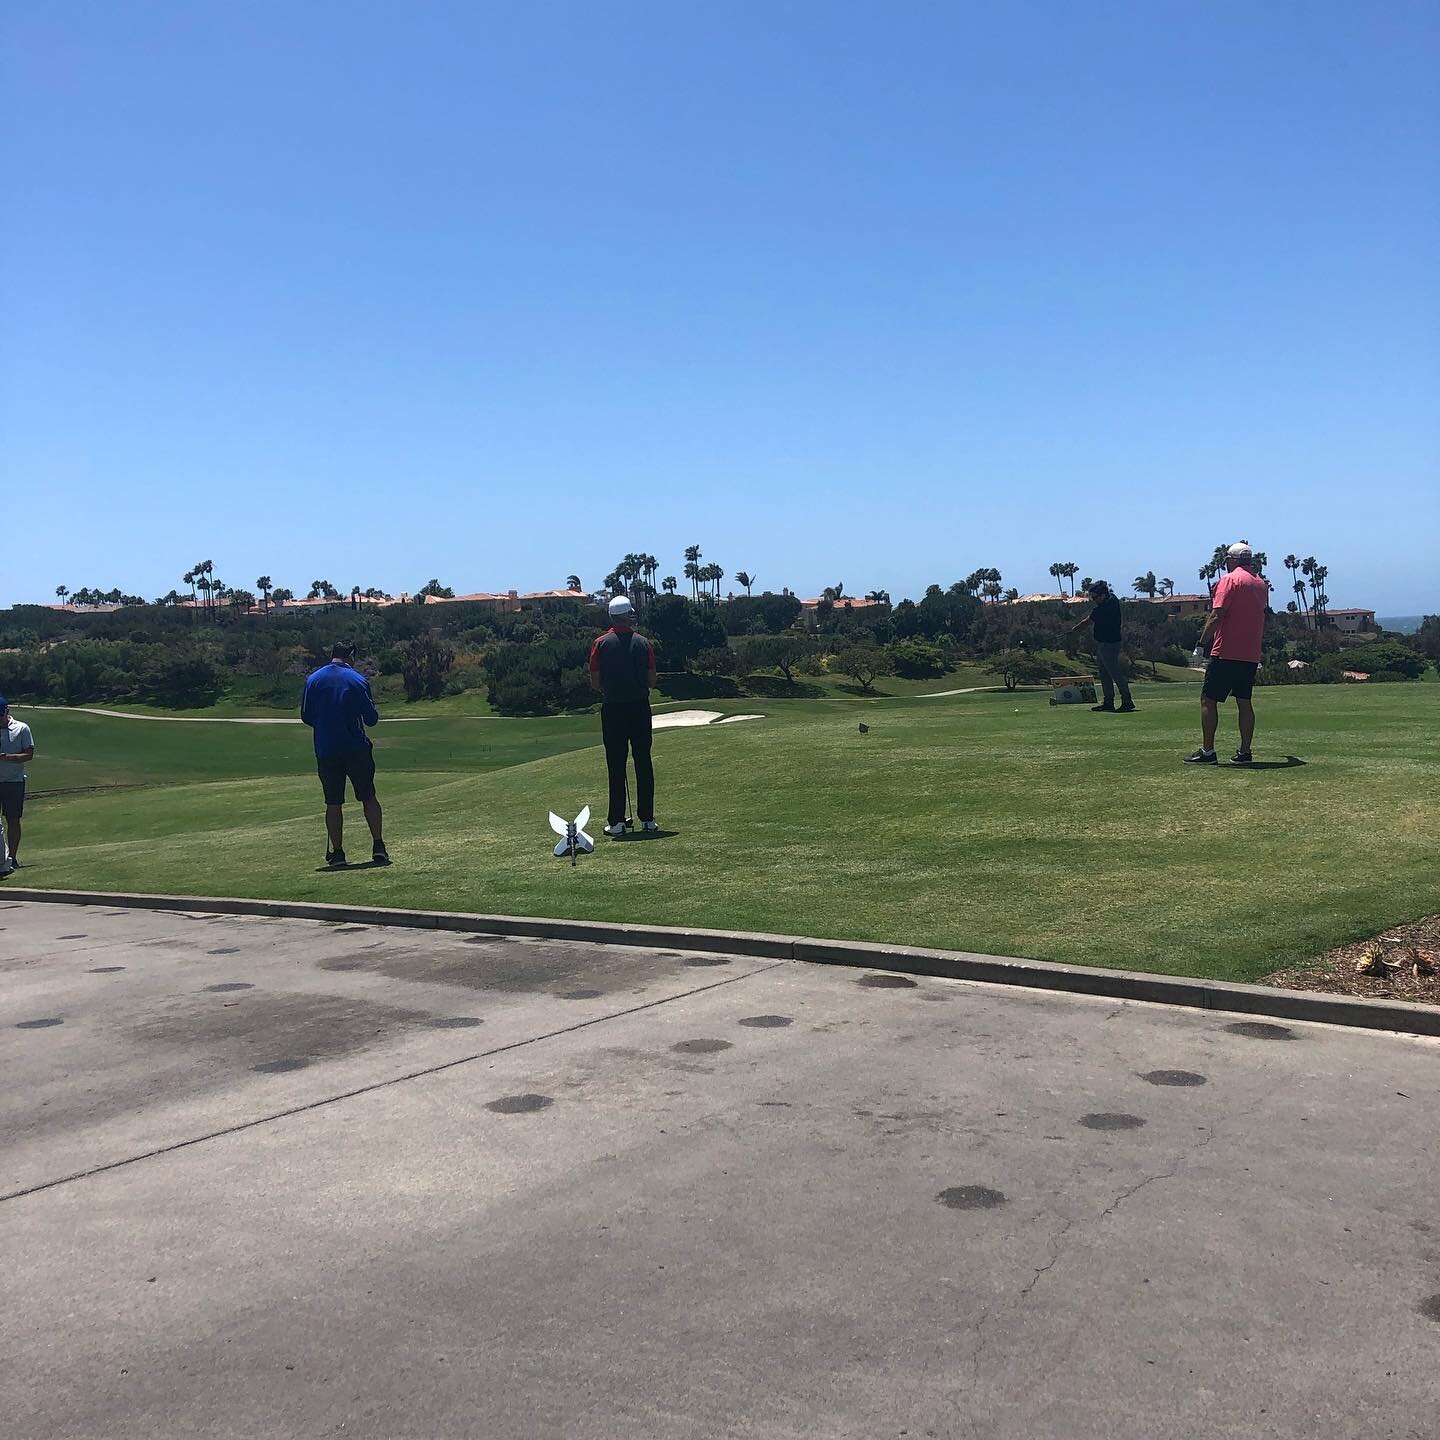 What a beautiful day to be golfing for education! Thank you to everyone who came out today, we appreciate all your support!  #educationforhumanity #education